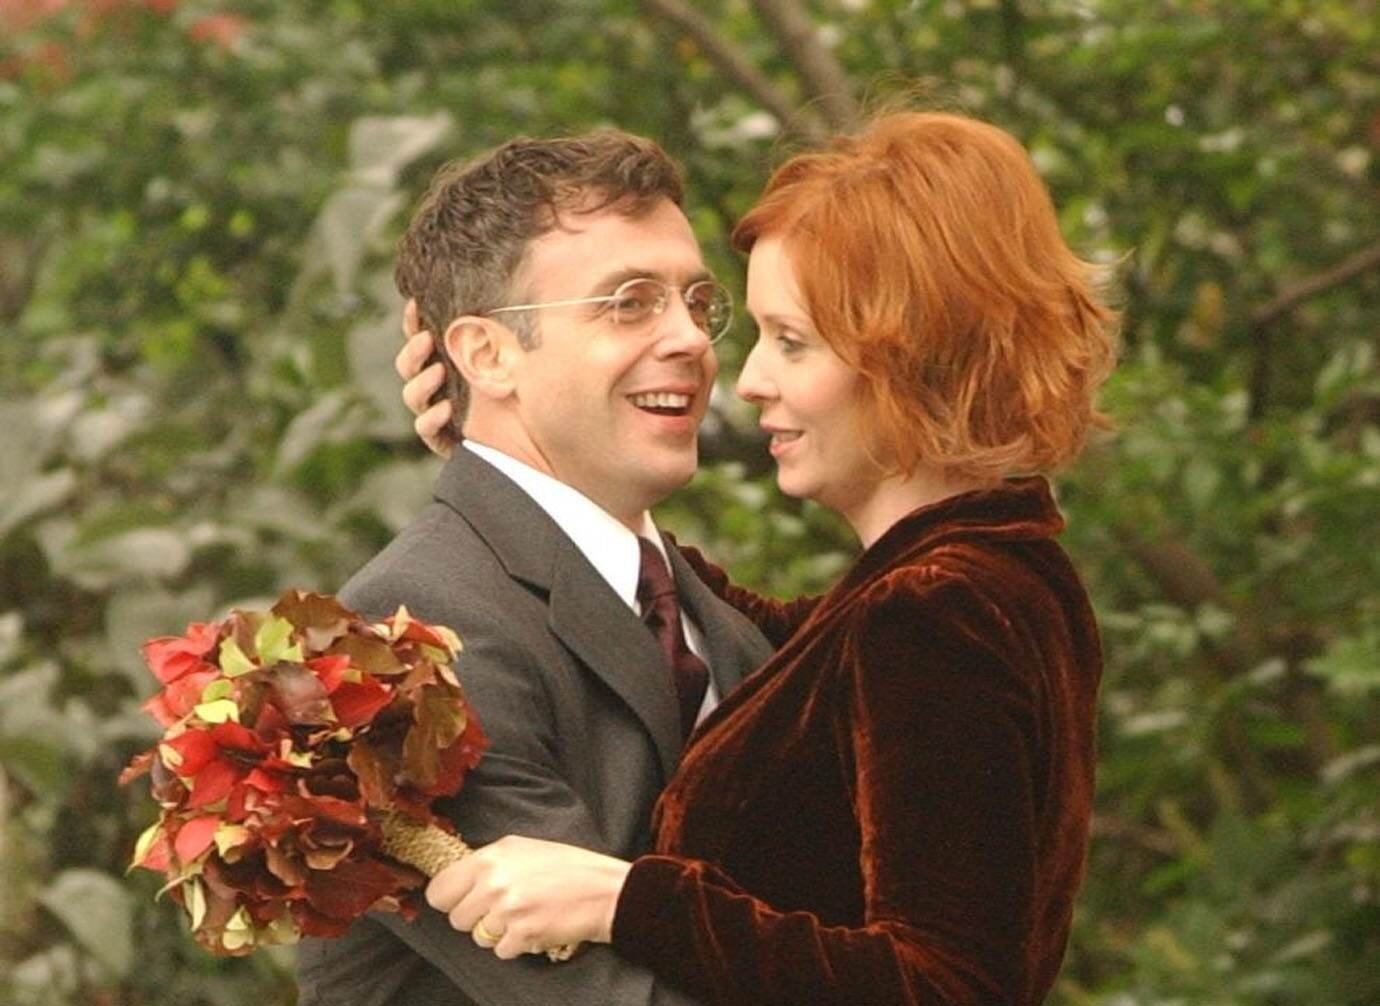 Steve Brady and Miranda Hobbes hug at their wedding in 'Sex and the City'